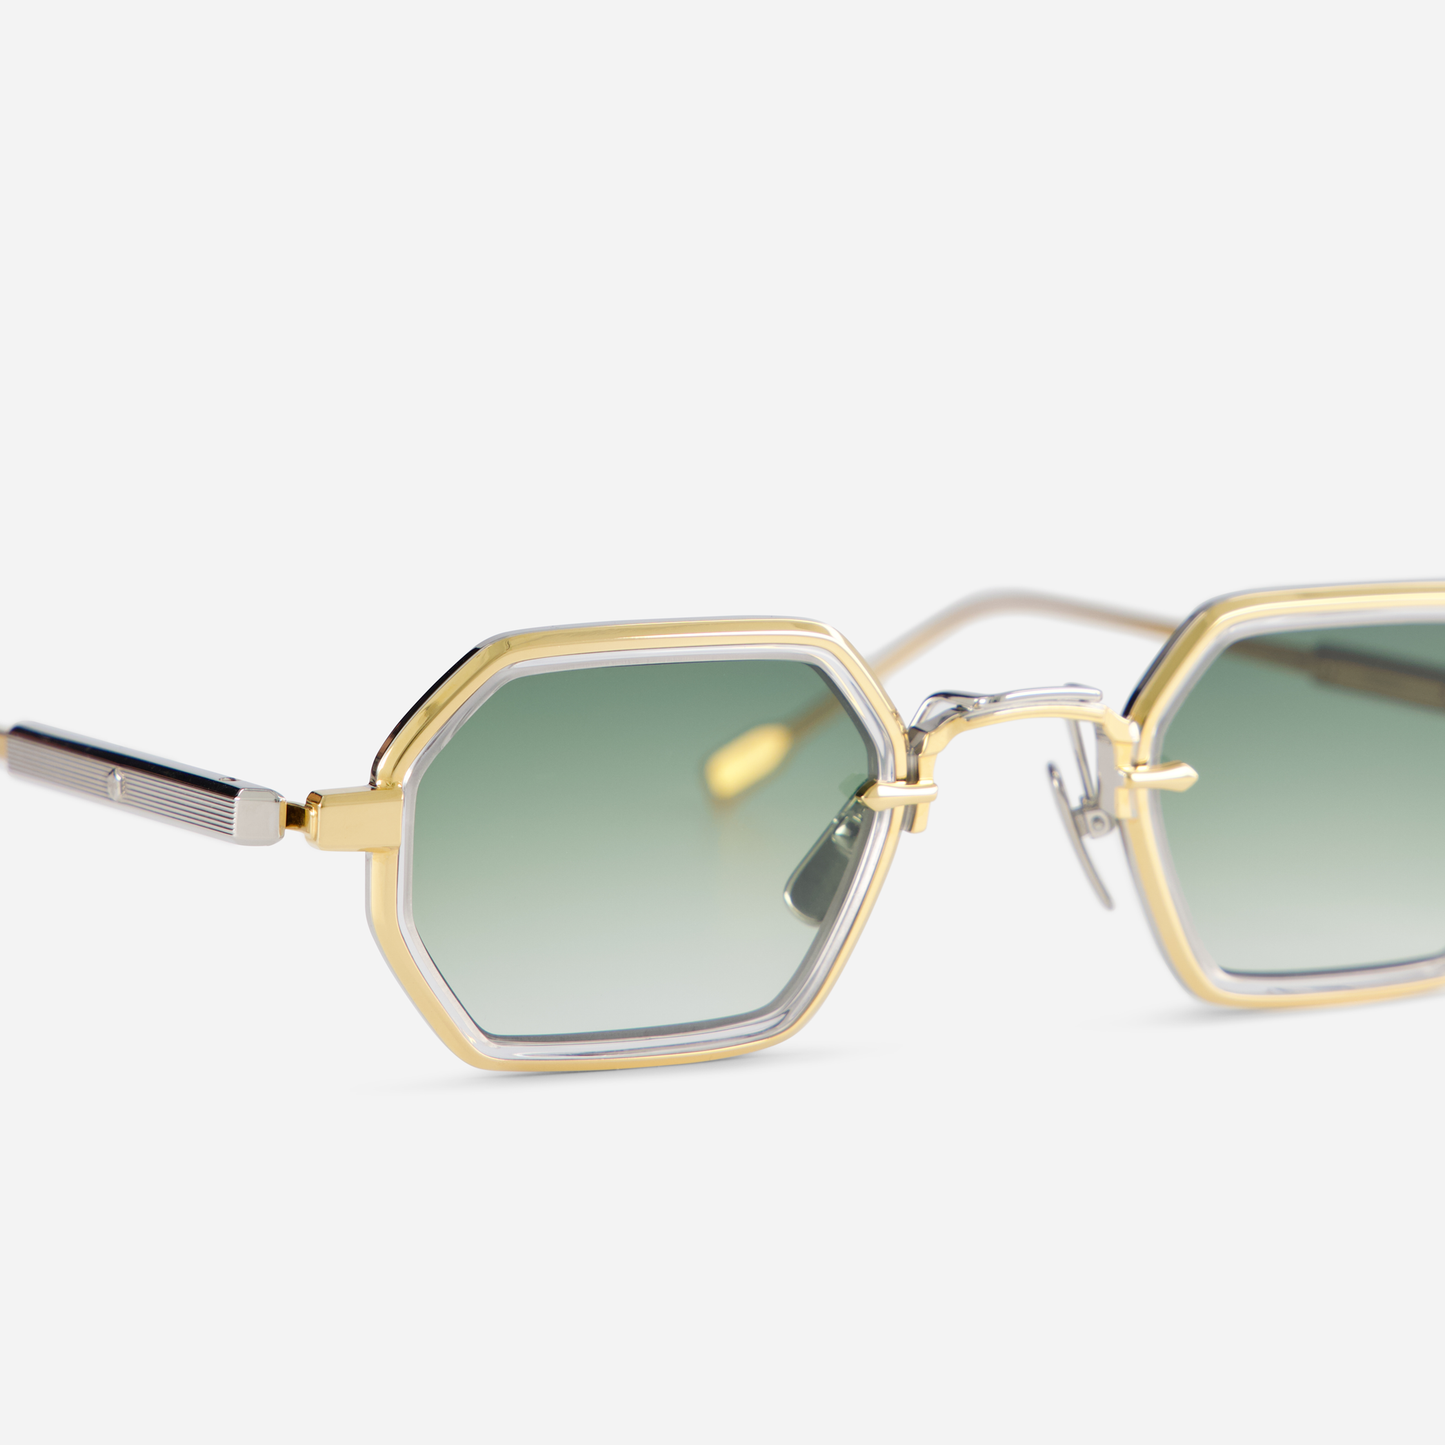 With a titanium frame accented by a yellow gold coating, the Hadar-T YG/P-1 eyewear incorporates a crystal takiron rim insert and gradient green lenses.